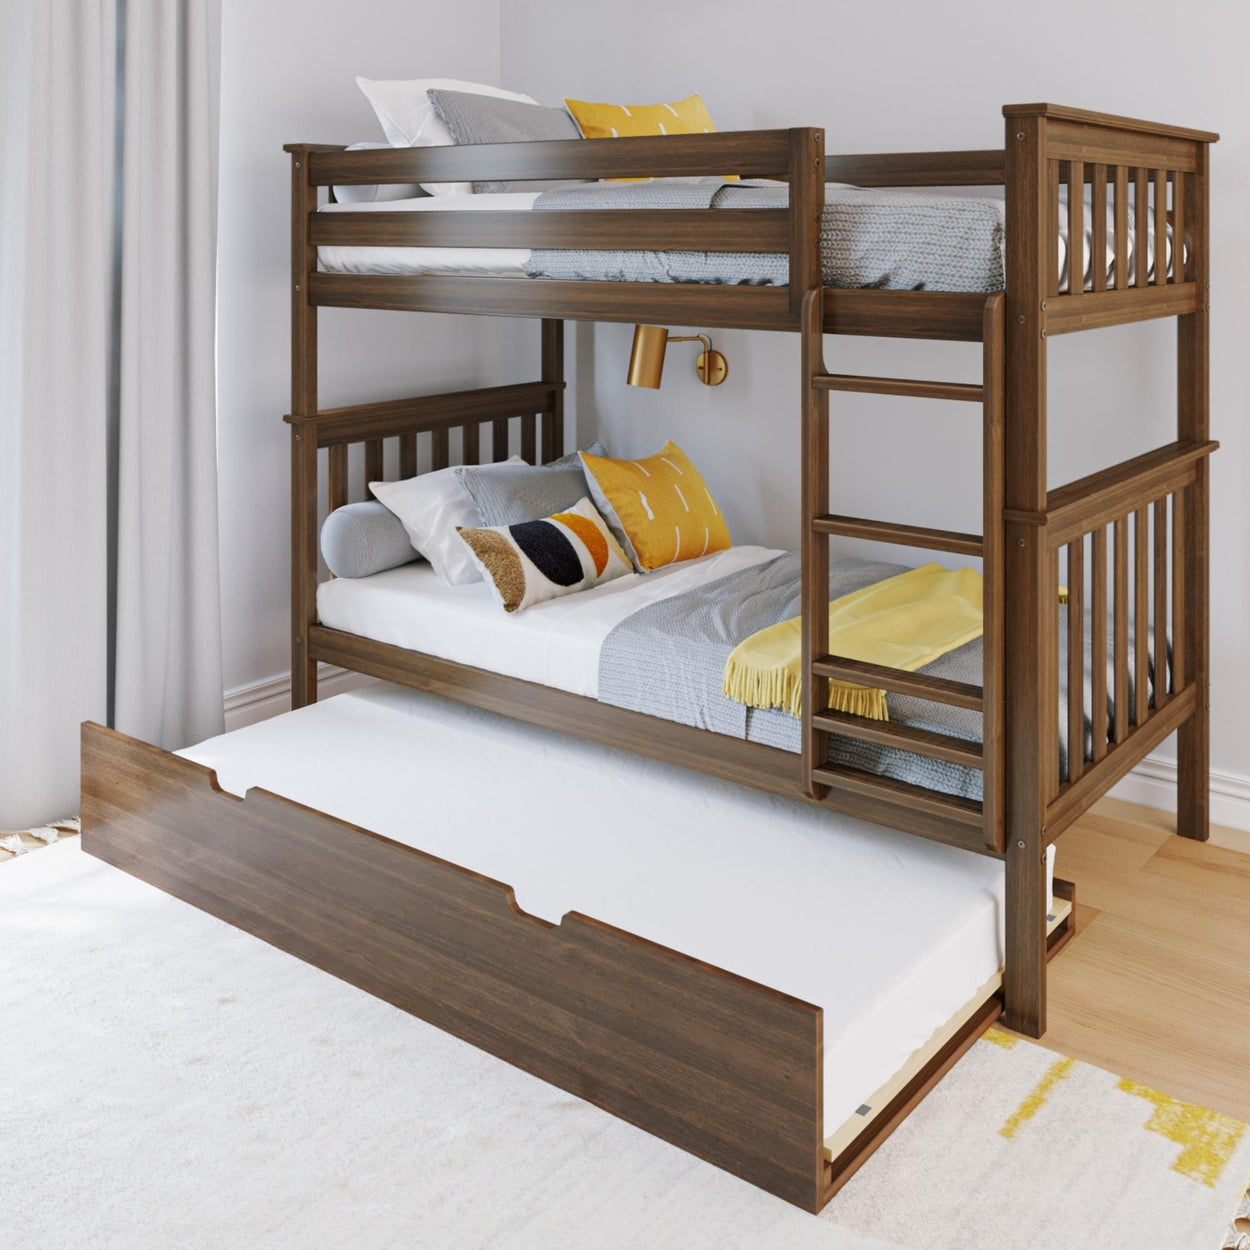 186201-008 : Bunk Beds Classic Twin over Twin Bunk Bed with Trundle, Walnut